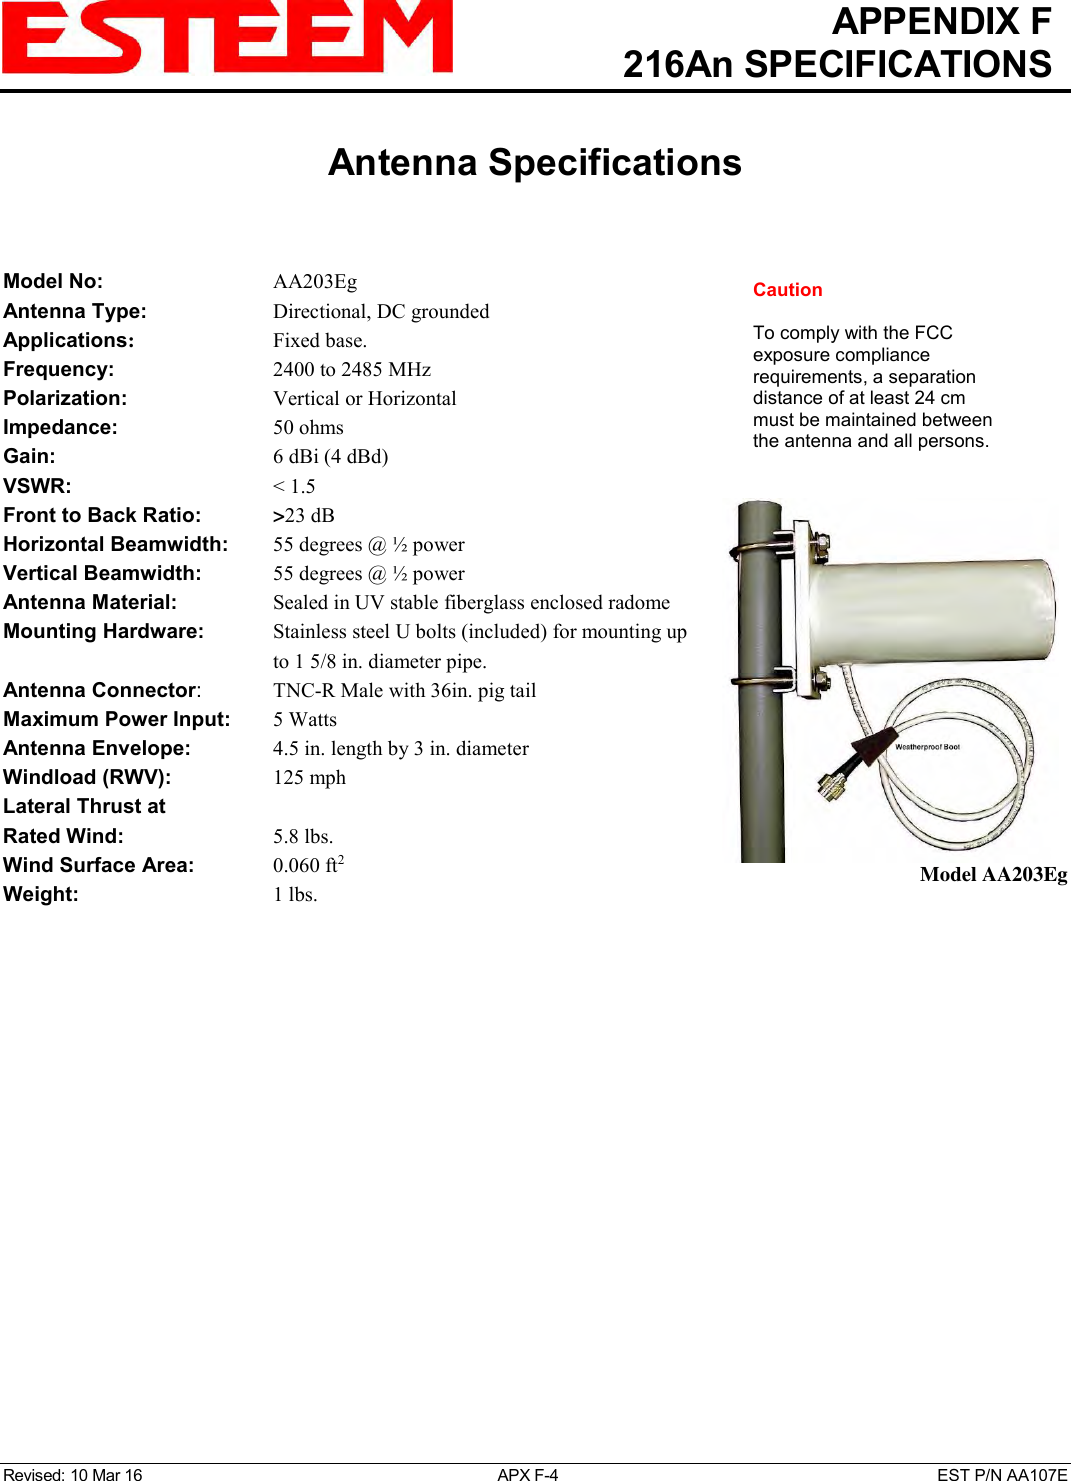   APPENDIX F   216An SPECIFICATIONS   Antenna Specifications   Revised: 10 Mar 16  APX F-4  EST P/N AA107E   Model No:        AA203Eg Antenna Type:  Directional, DC grounded  Applications:  Fixed base. Frequency:      2400 to 2485 MHz  Polarization:      Vertical or Horizontal Impedance:        50 ohms Gain:           6 dBi (4 dBd) VSWR:           &lt; 1.5  Front to Back Ratio:    &gt;23 dB Horizontal Beamwidth:  55 degrees @ ½ power Vertical Beamwidth:      55 degrees @ ½ power Antenna Material:  Sealed in UV stable fiberglass enclosed radome  Mounting Hardware:    Stainless steel U bolts (included) for mounting up to 1 5/8 in. diameter pipe. Antenna Connector:    TNC-R Male with 36in. pig tail Maximum Power Input:    5 Watts Antenna Envelope:    4.5 in. length by 3 in. diameter Windload (RWV):    125 mph Lateral Thrust at  Rated Wind:  5.8 lbs. Wind Surface Area:  0.060 ft2 Weight:  1 lbs.      Model AA203Eg Caution  To comply with the FCC exposure compliance requirements, a separation distance of at least 24 cm must be maintained between the antenna and all persons. 